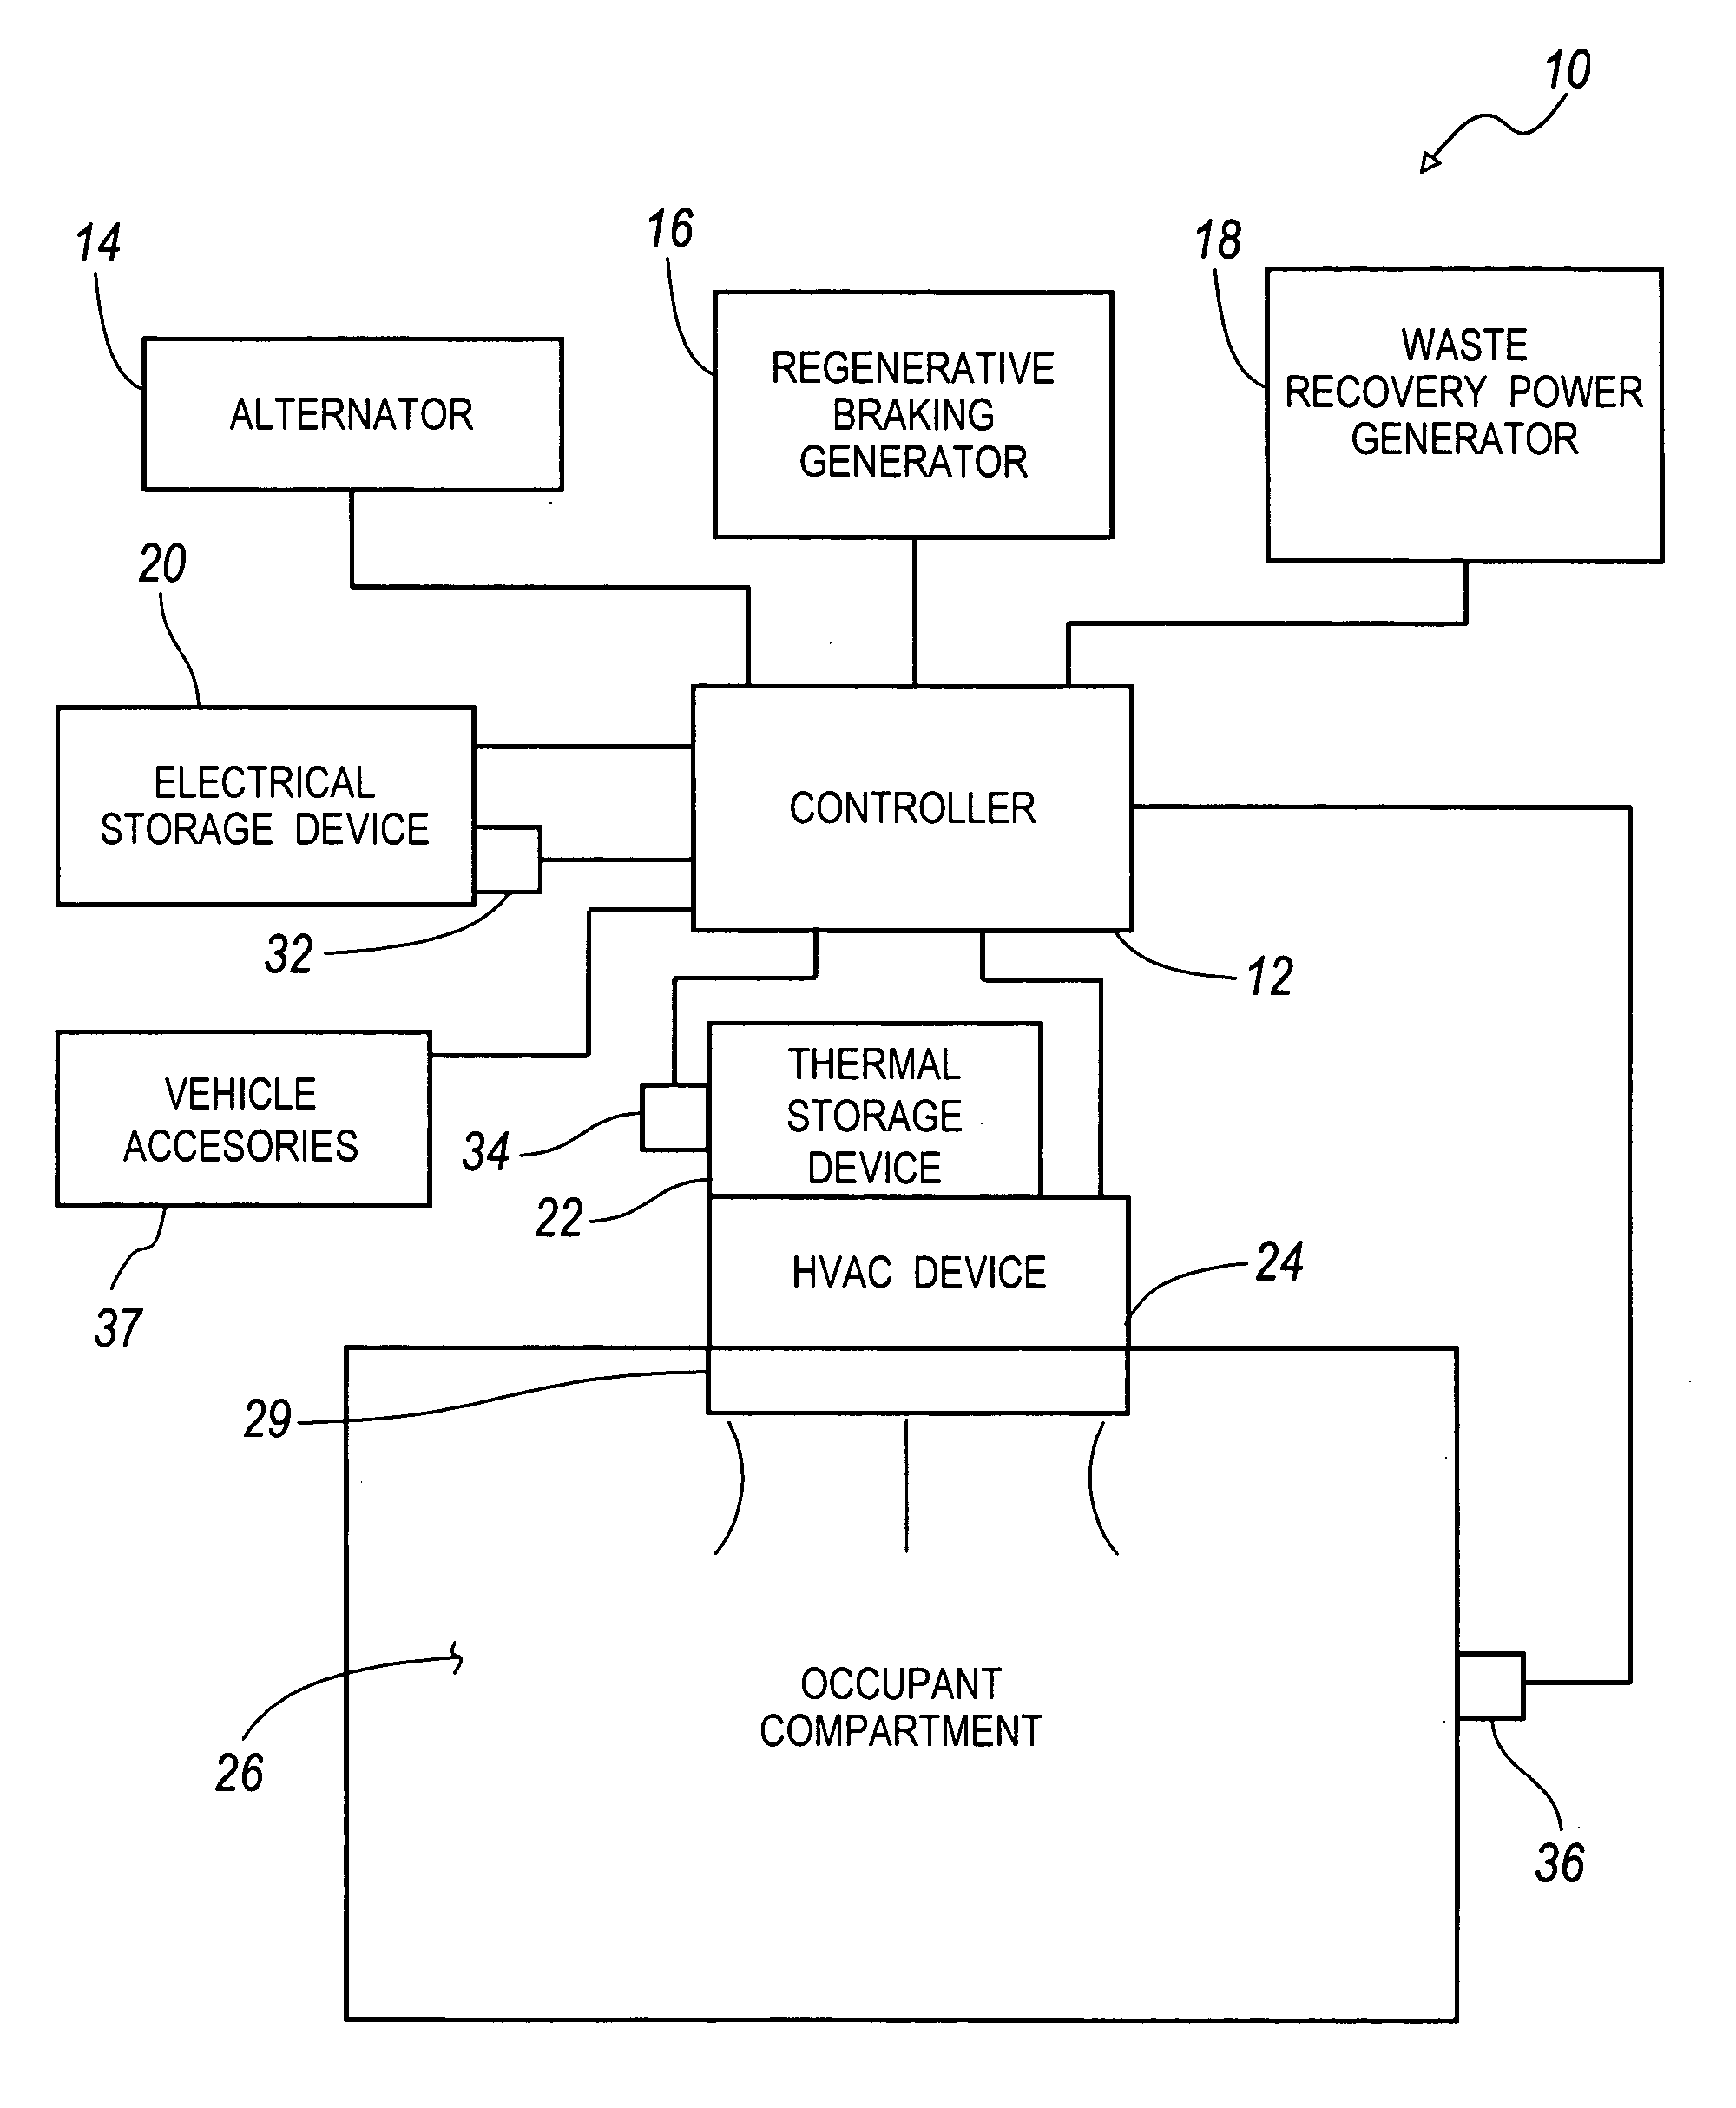 Energy management system for a hybrid-electric vehicle